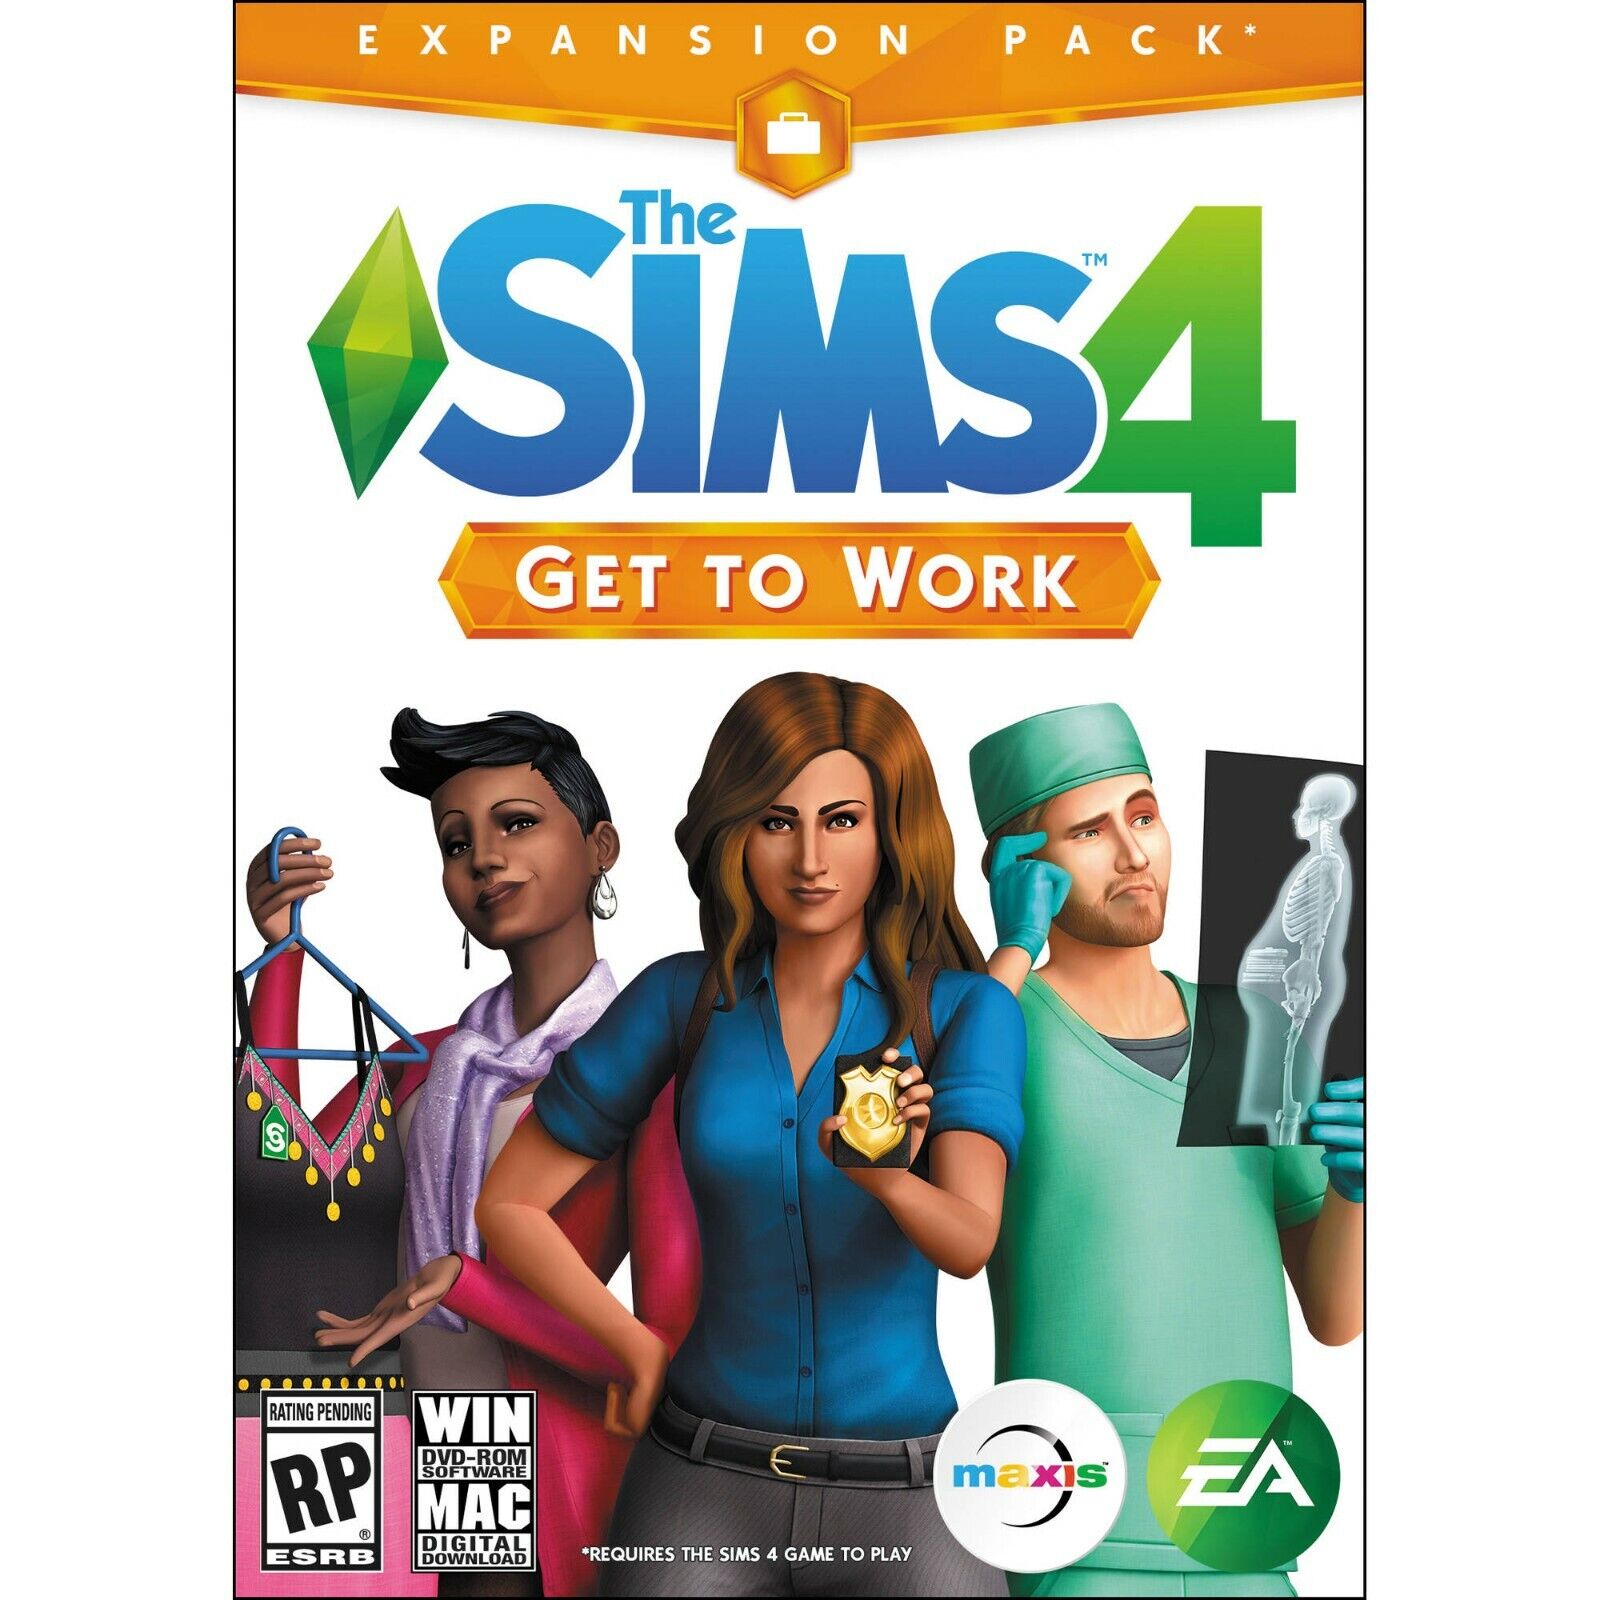 The Sims 4: Get to Work Expansion Pack for DVD-ROM Software/Mac Digital Download